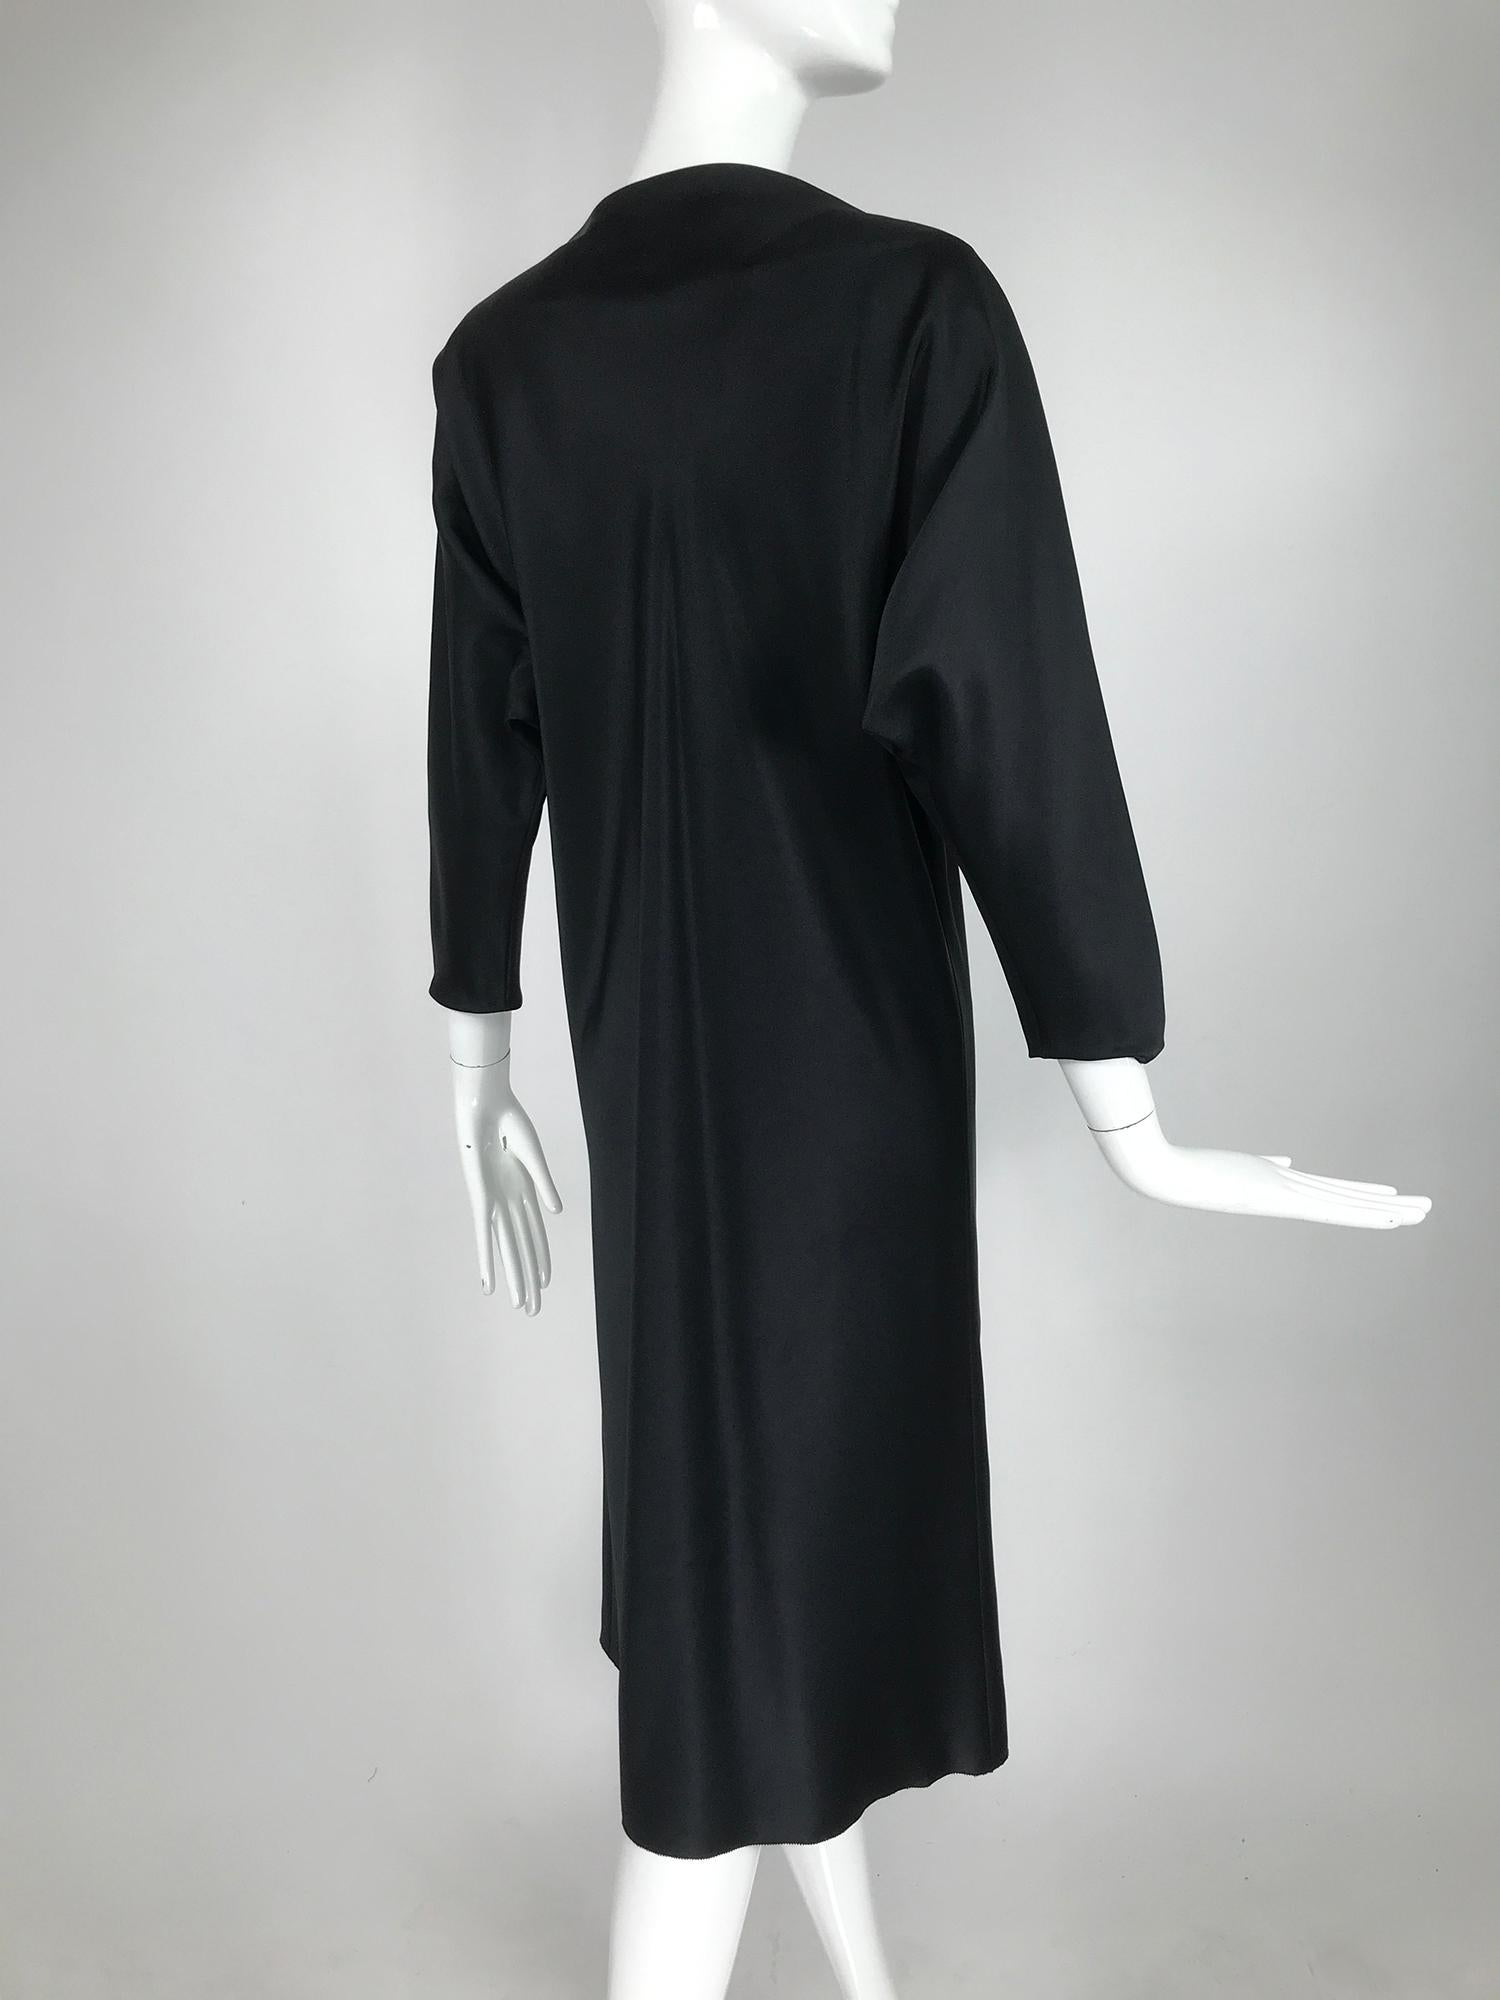 Jackie Rogers Classic Black Satin Bias Cut Dress  In Good Condition For Sale In West Palm Beach, FL